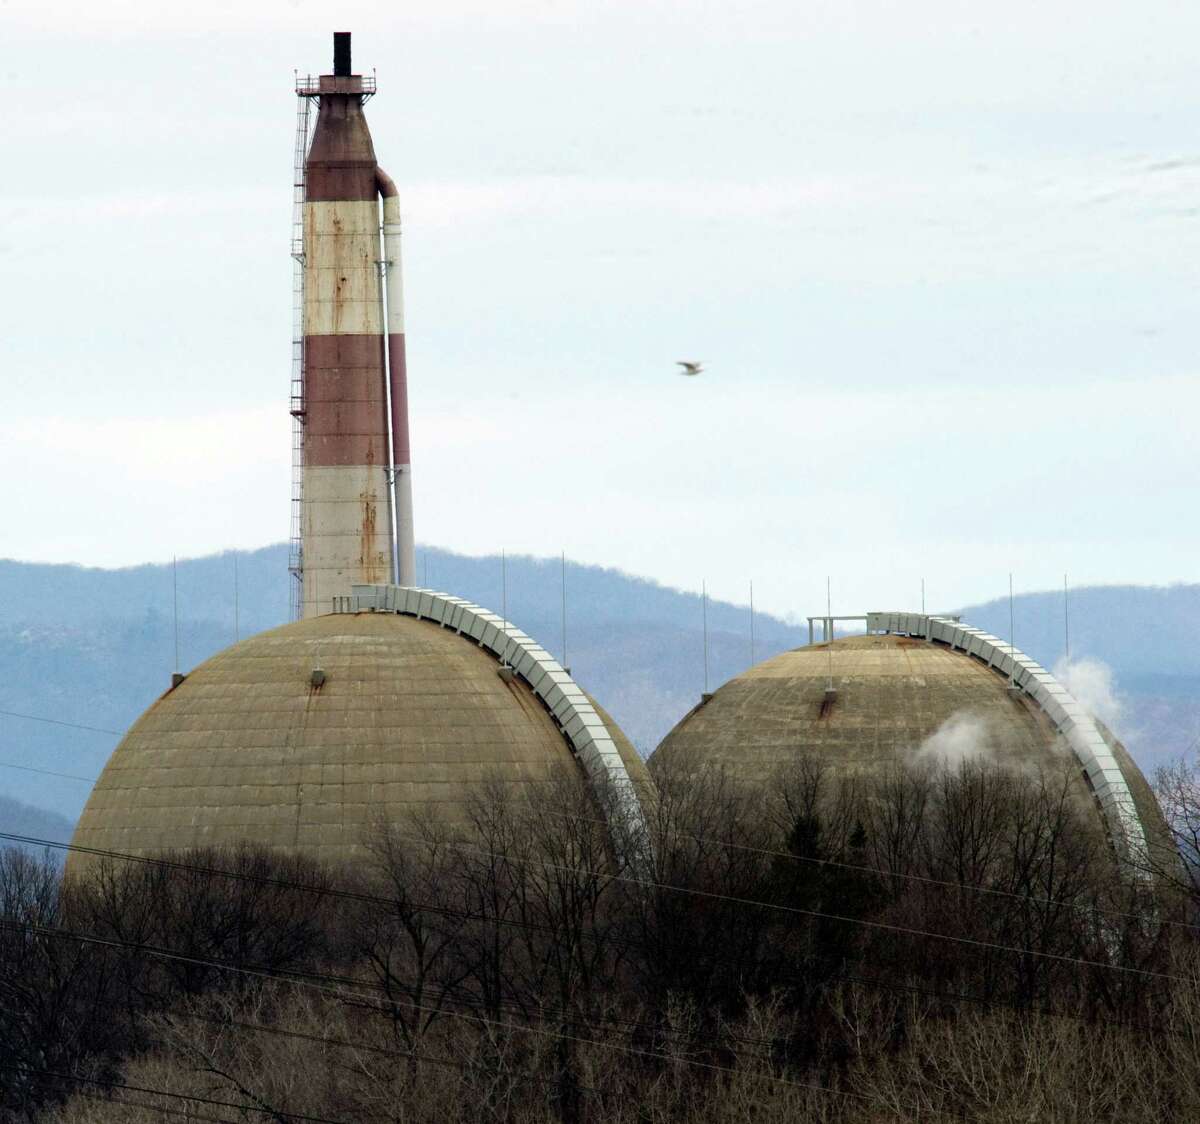 The Indian Point Nuclear Power Plant on the banks of the Hudson River March 22, 2011 in Buchanan, NY. The Indian Point station, comprised of two operating nuclear reactors, sits atop the Ramapo fault line, causing concern for some residents in the wake of the Japan disaster. AFP PHOTO / DON EMMERT (Photo credit should read DON EMMERT/AFP/Getty Images)